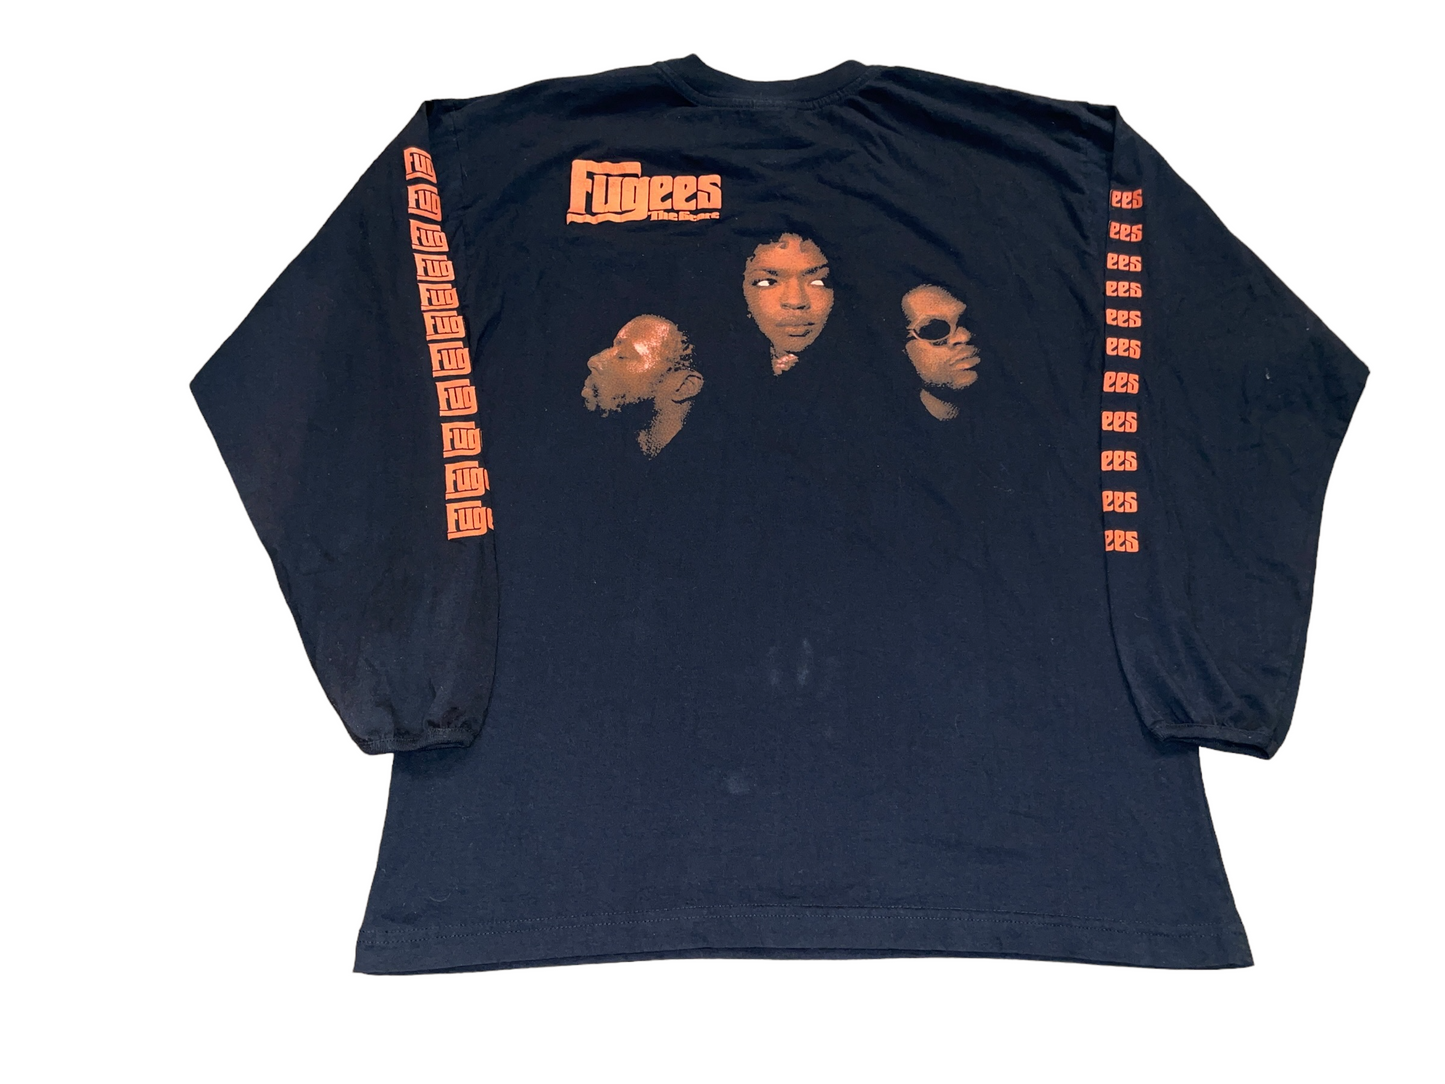 Vintage 90's Fugees The Score Long Sleeve Shirt